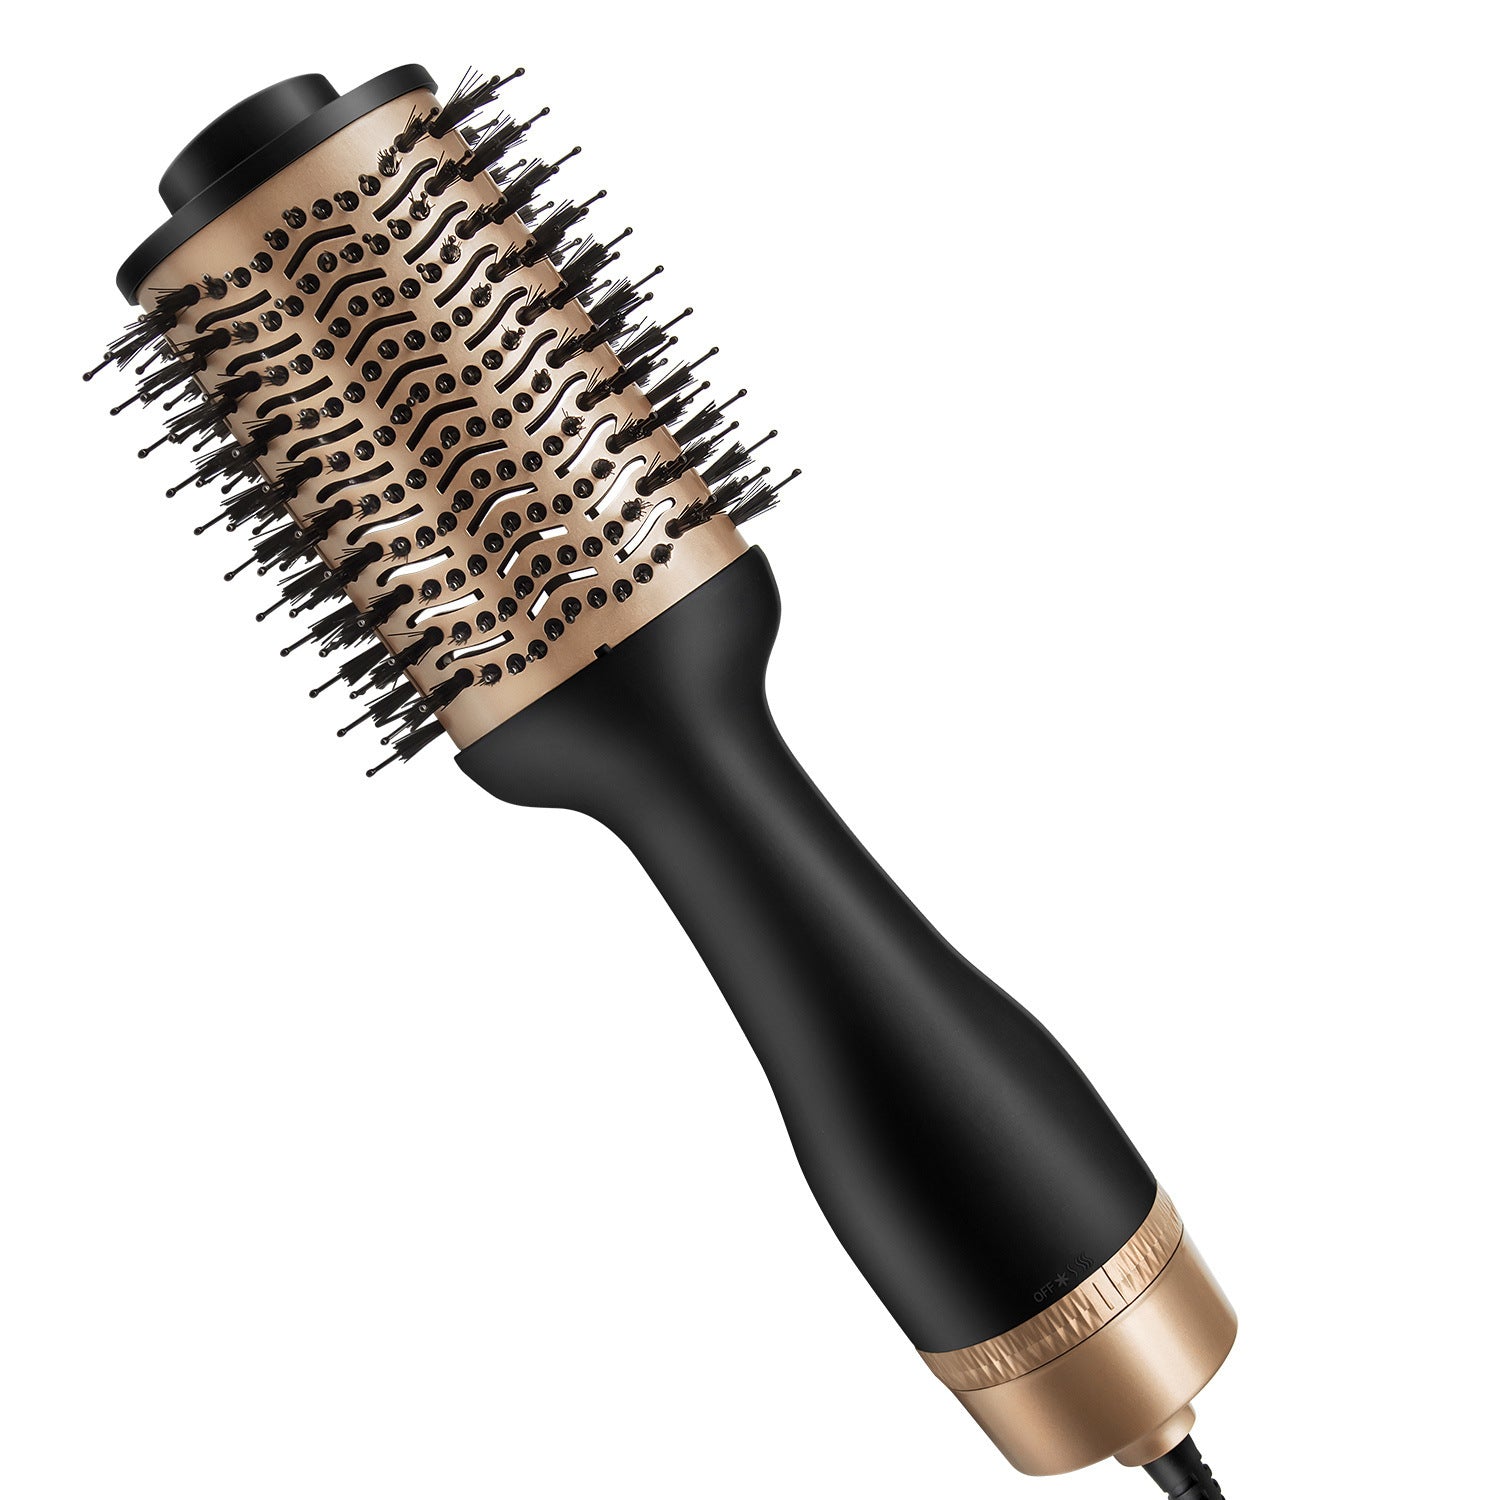 Curling Iron 3-in-1 Hot Air Comb: Hair Dryer, Straightener & Styler